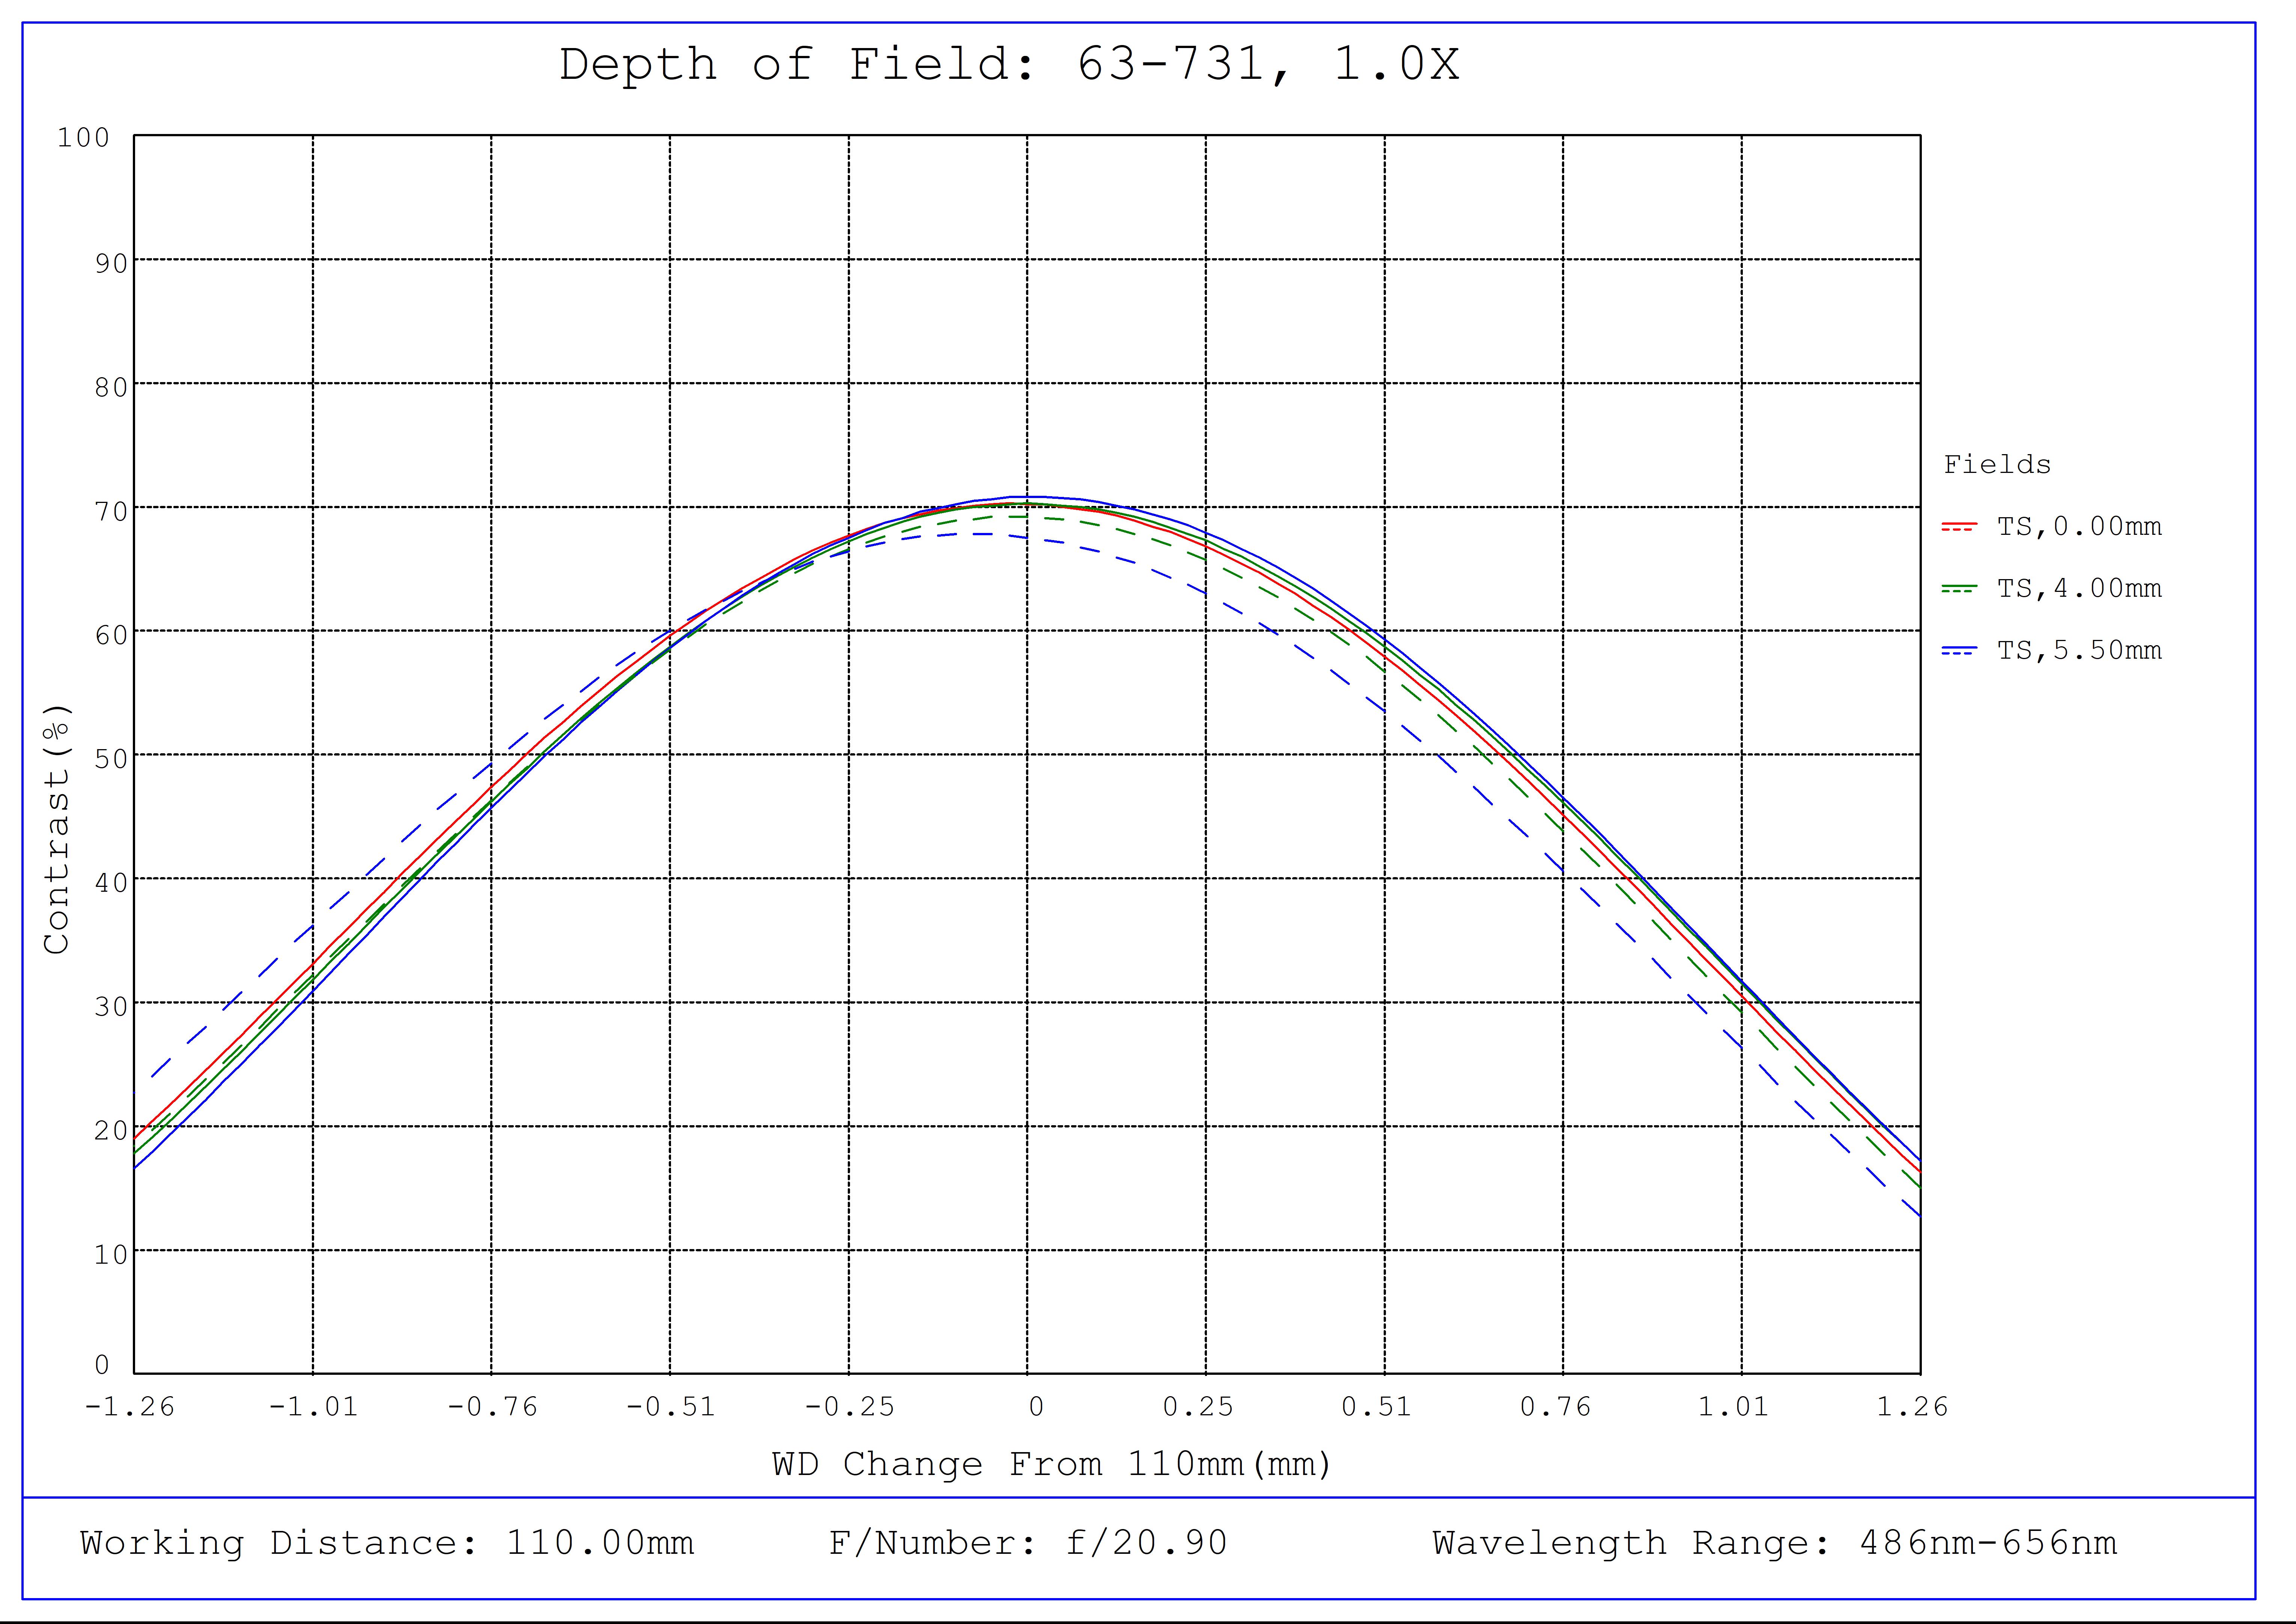 #63-731, 1X, 110mm WD CompactTL™ Telecentric Lens, Depth of Field Plot, 110mm Working Distance, f20.9